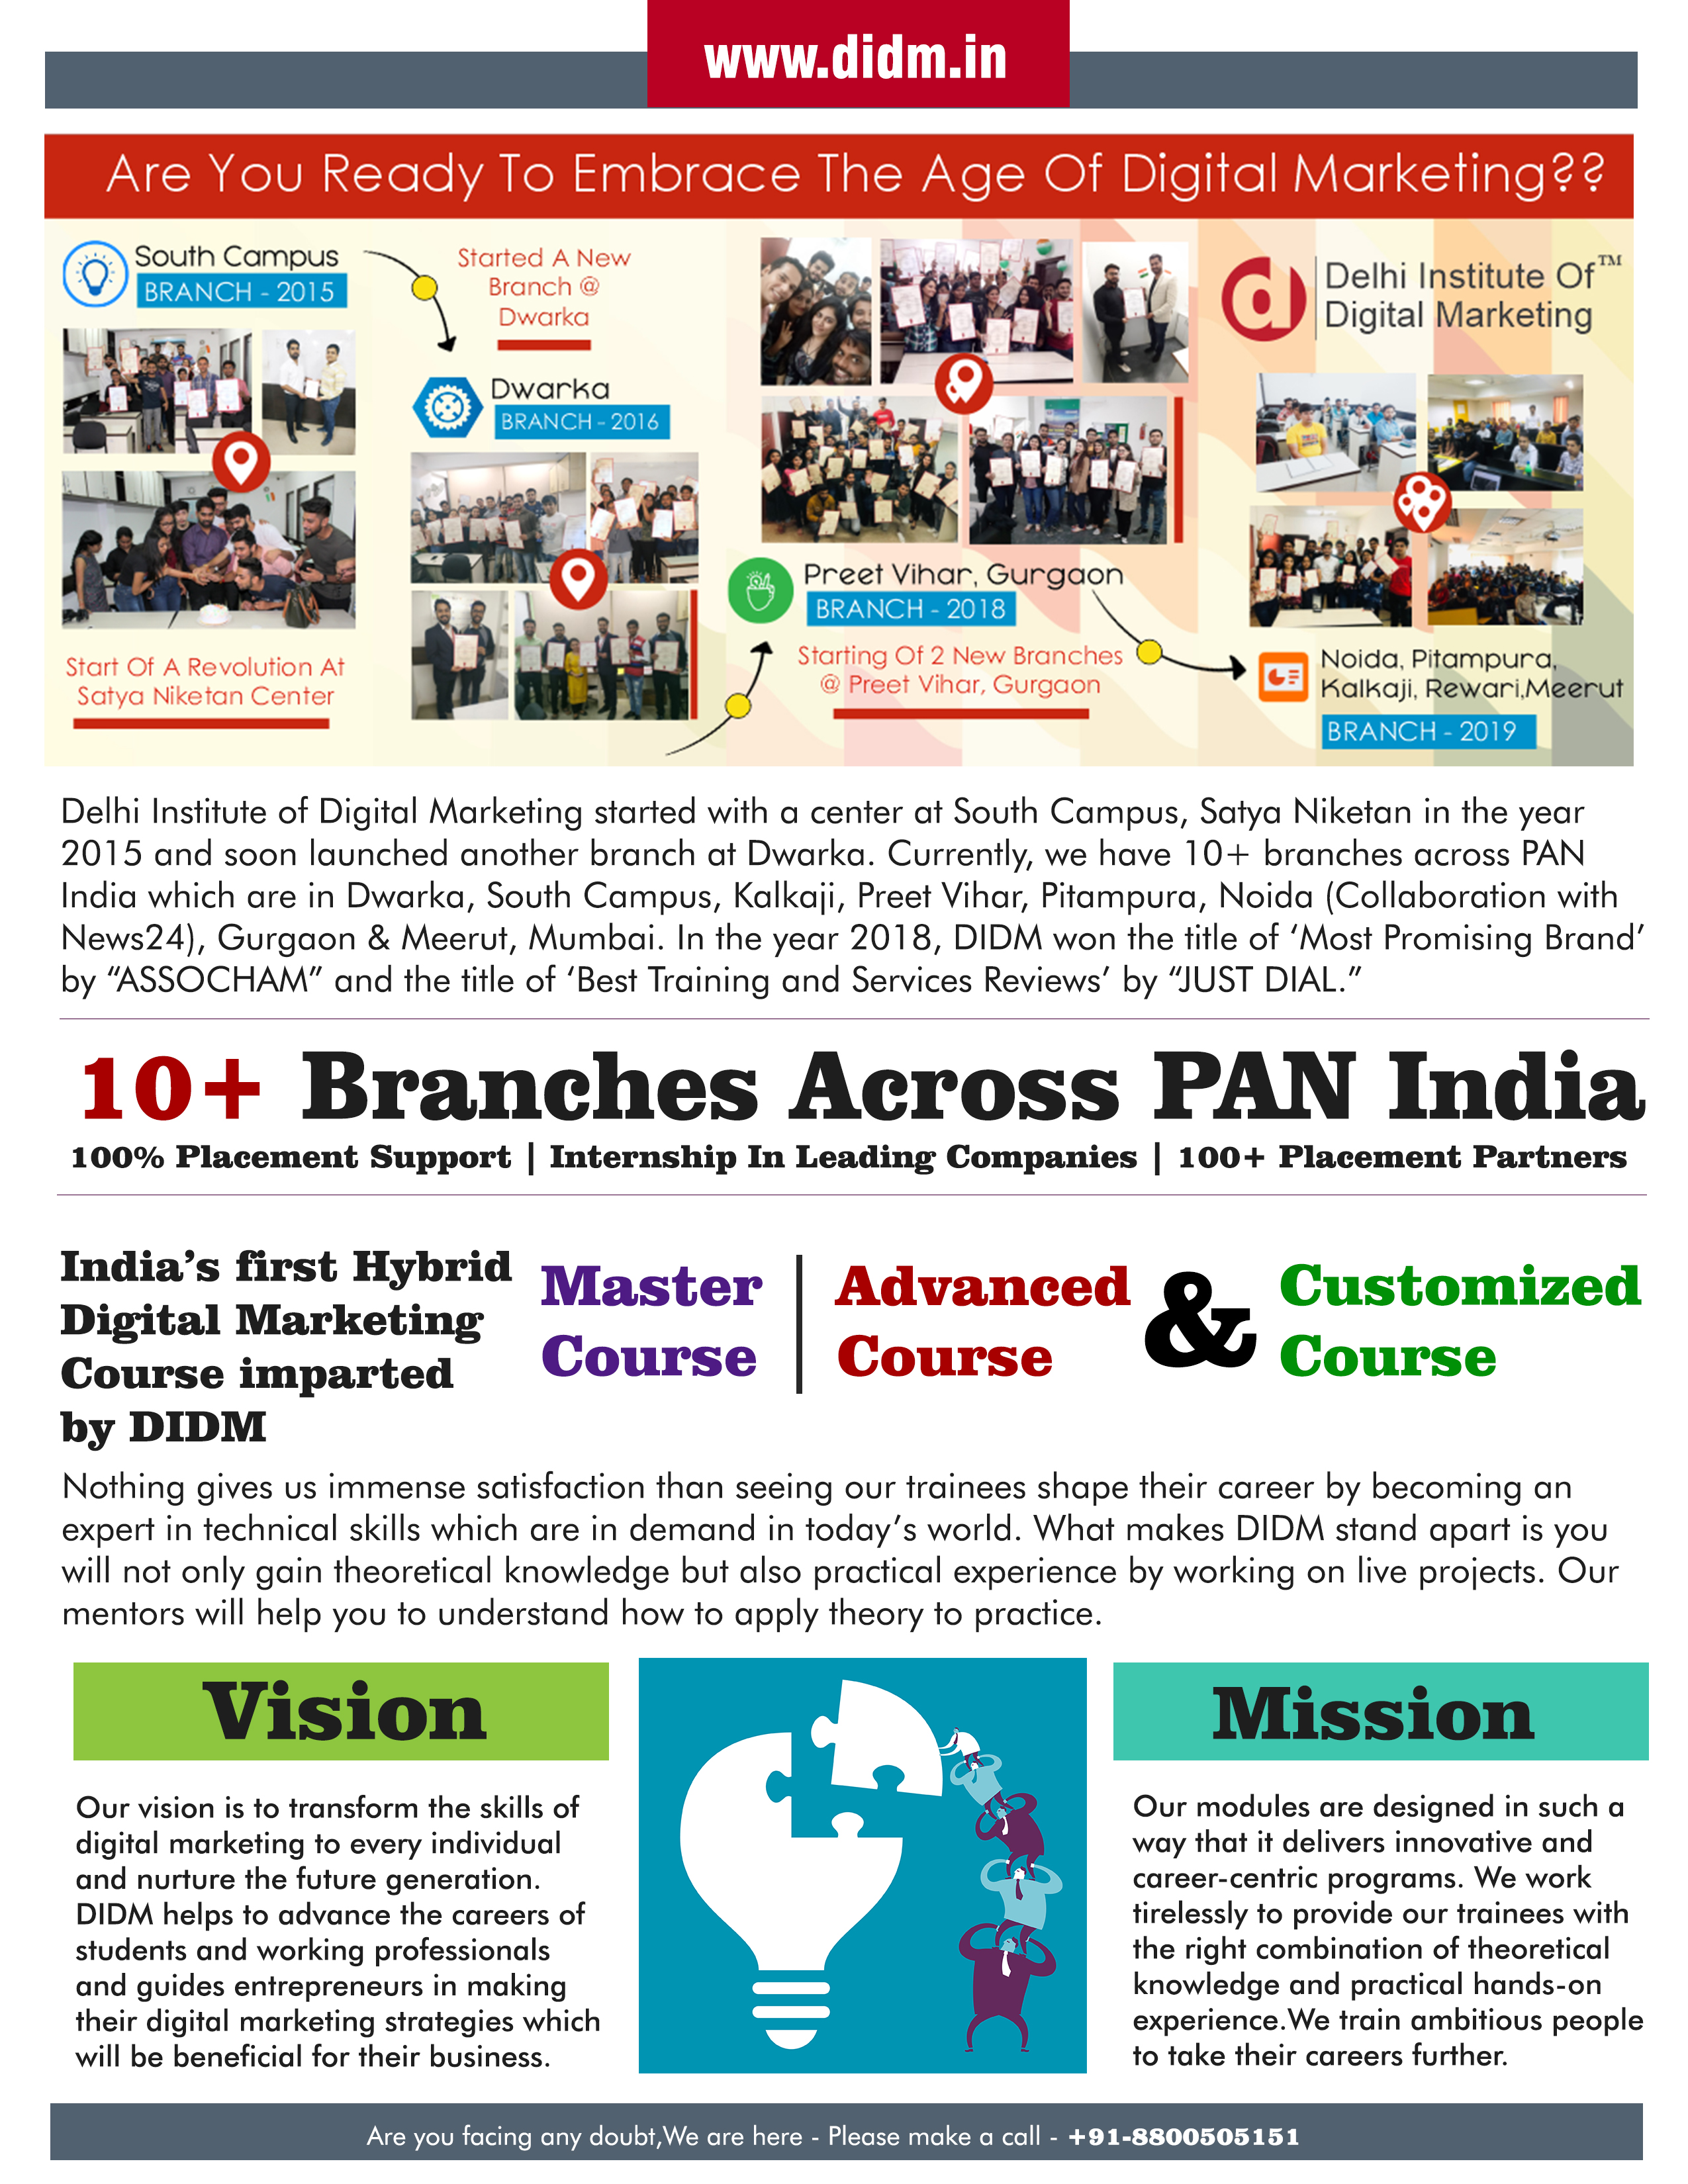 DIDM across PAN India Branches